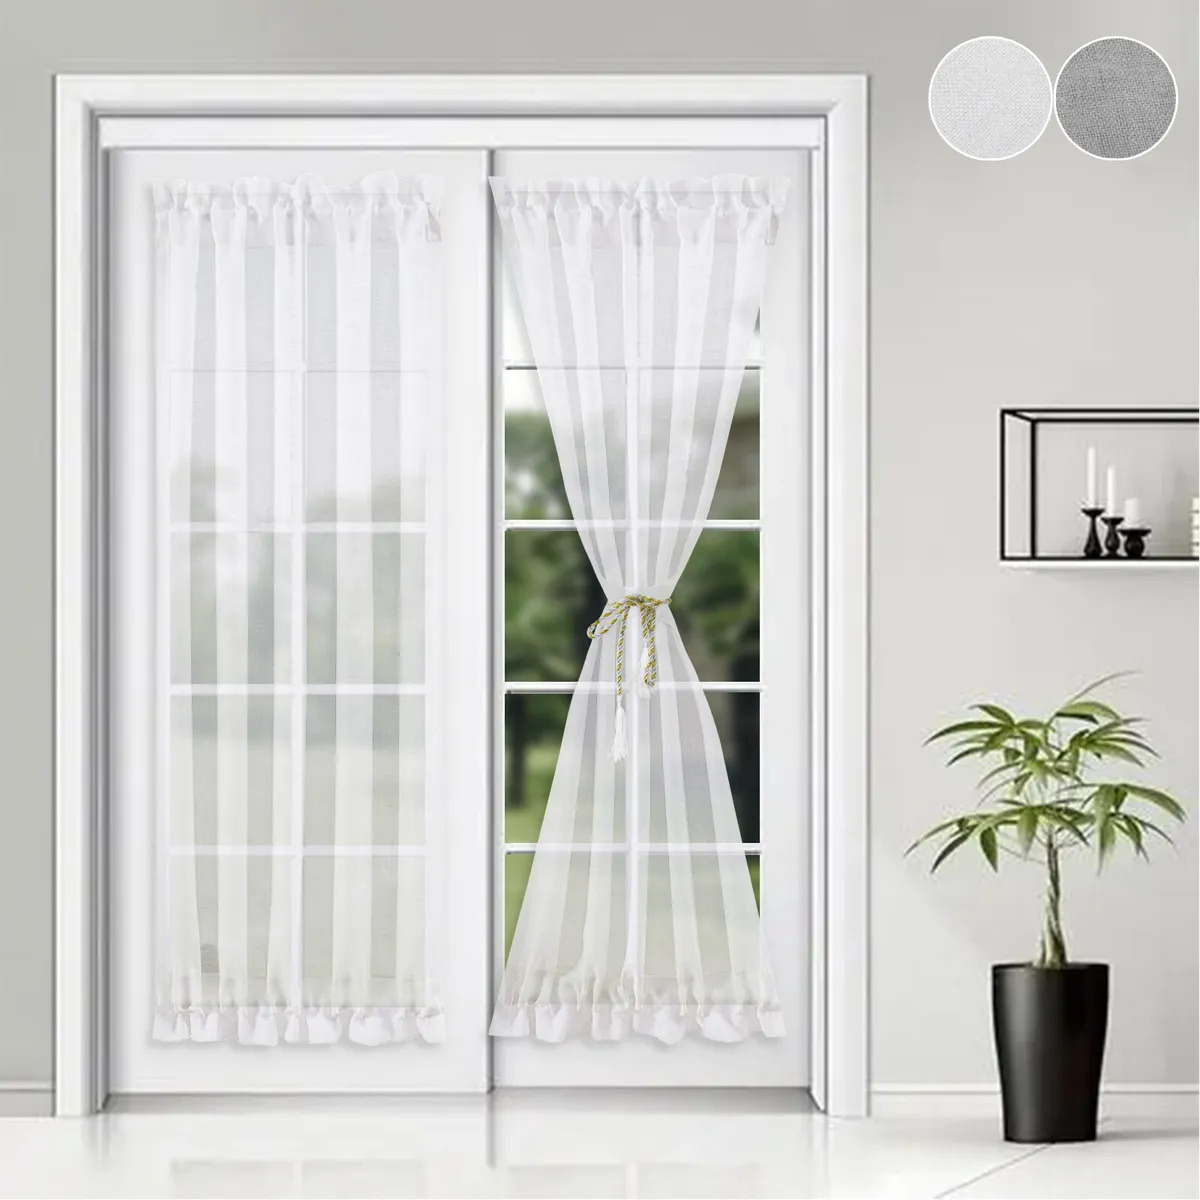  PI Blackout Door Curtain,Privacy Tie up Shade Thermal